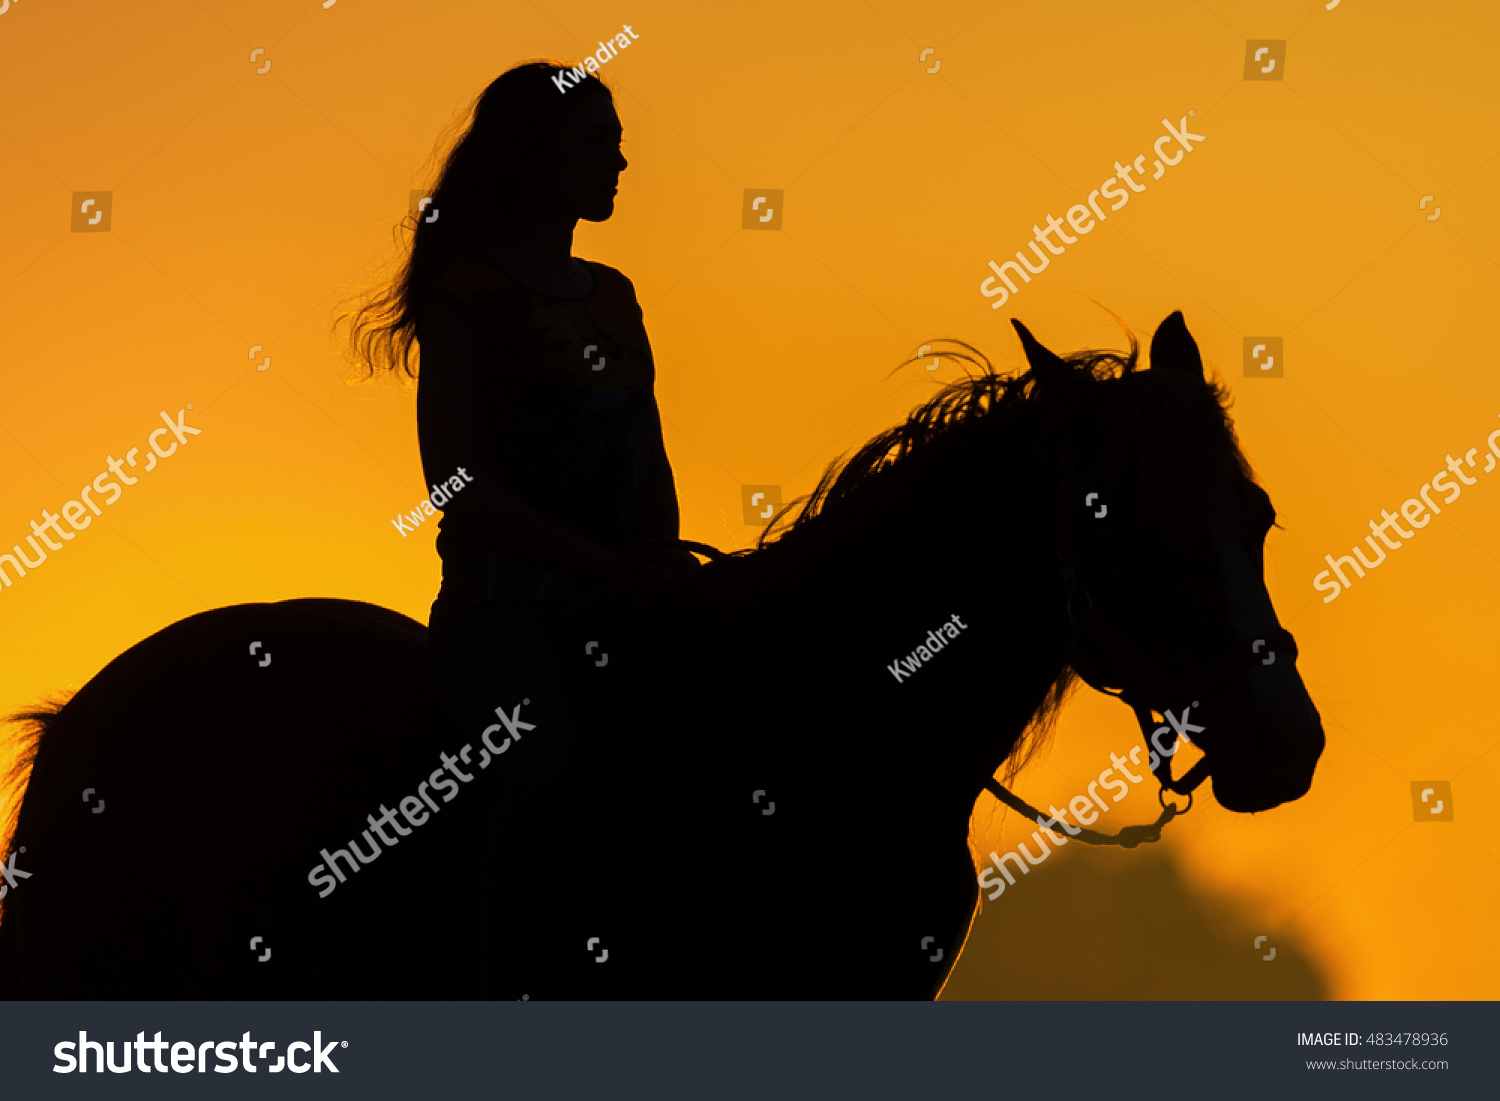 Girl and horse silhouette at sunset #483478936